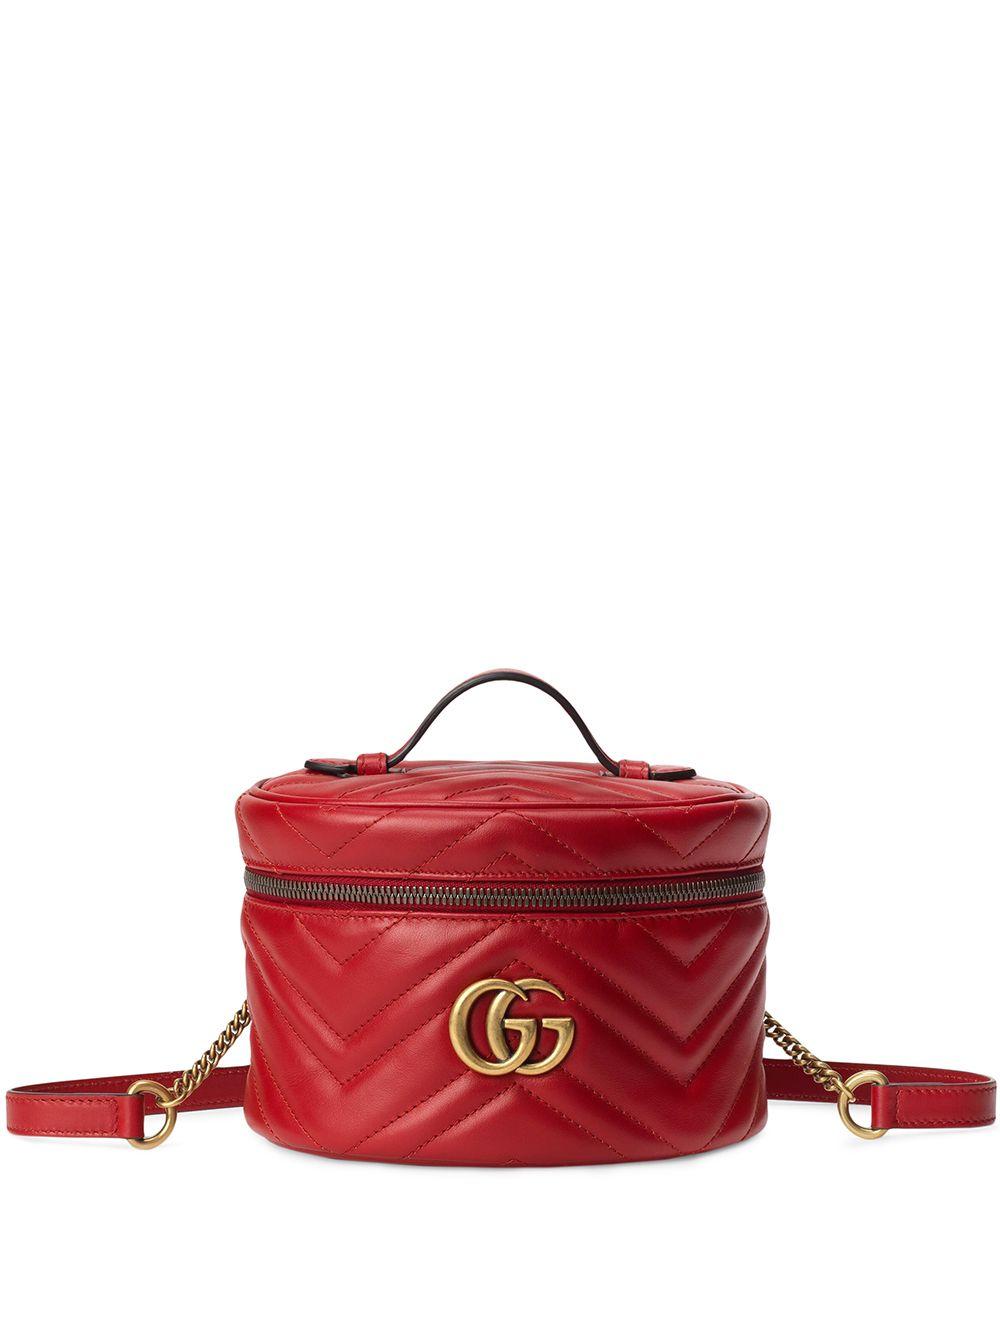 Gucci Leather GG Marmont Mini Backpack in Red - Lyst